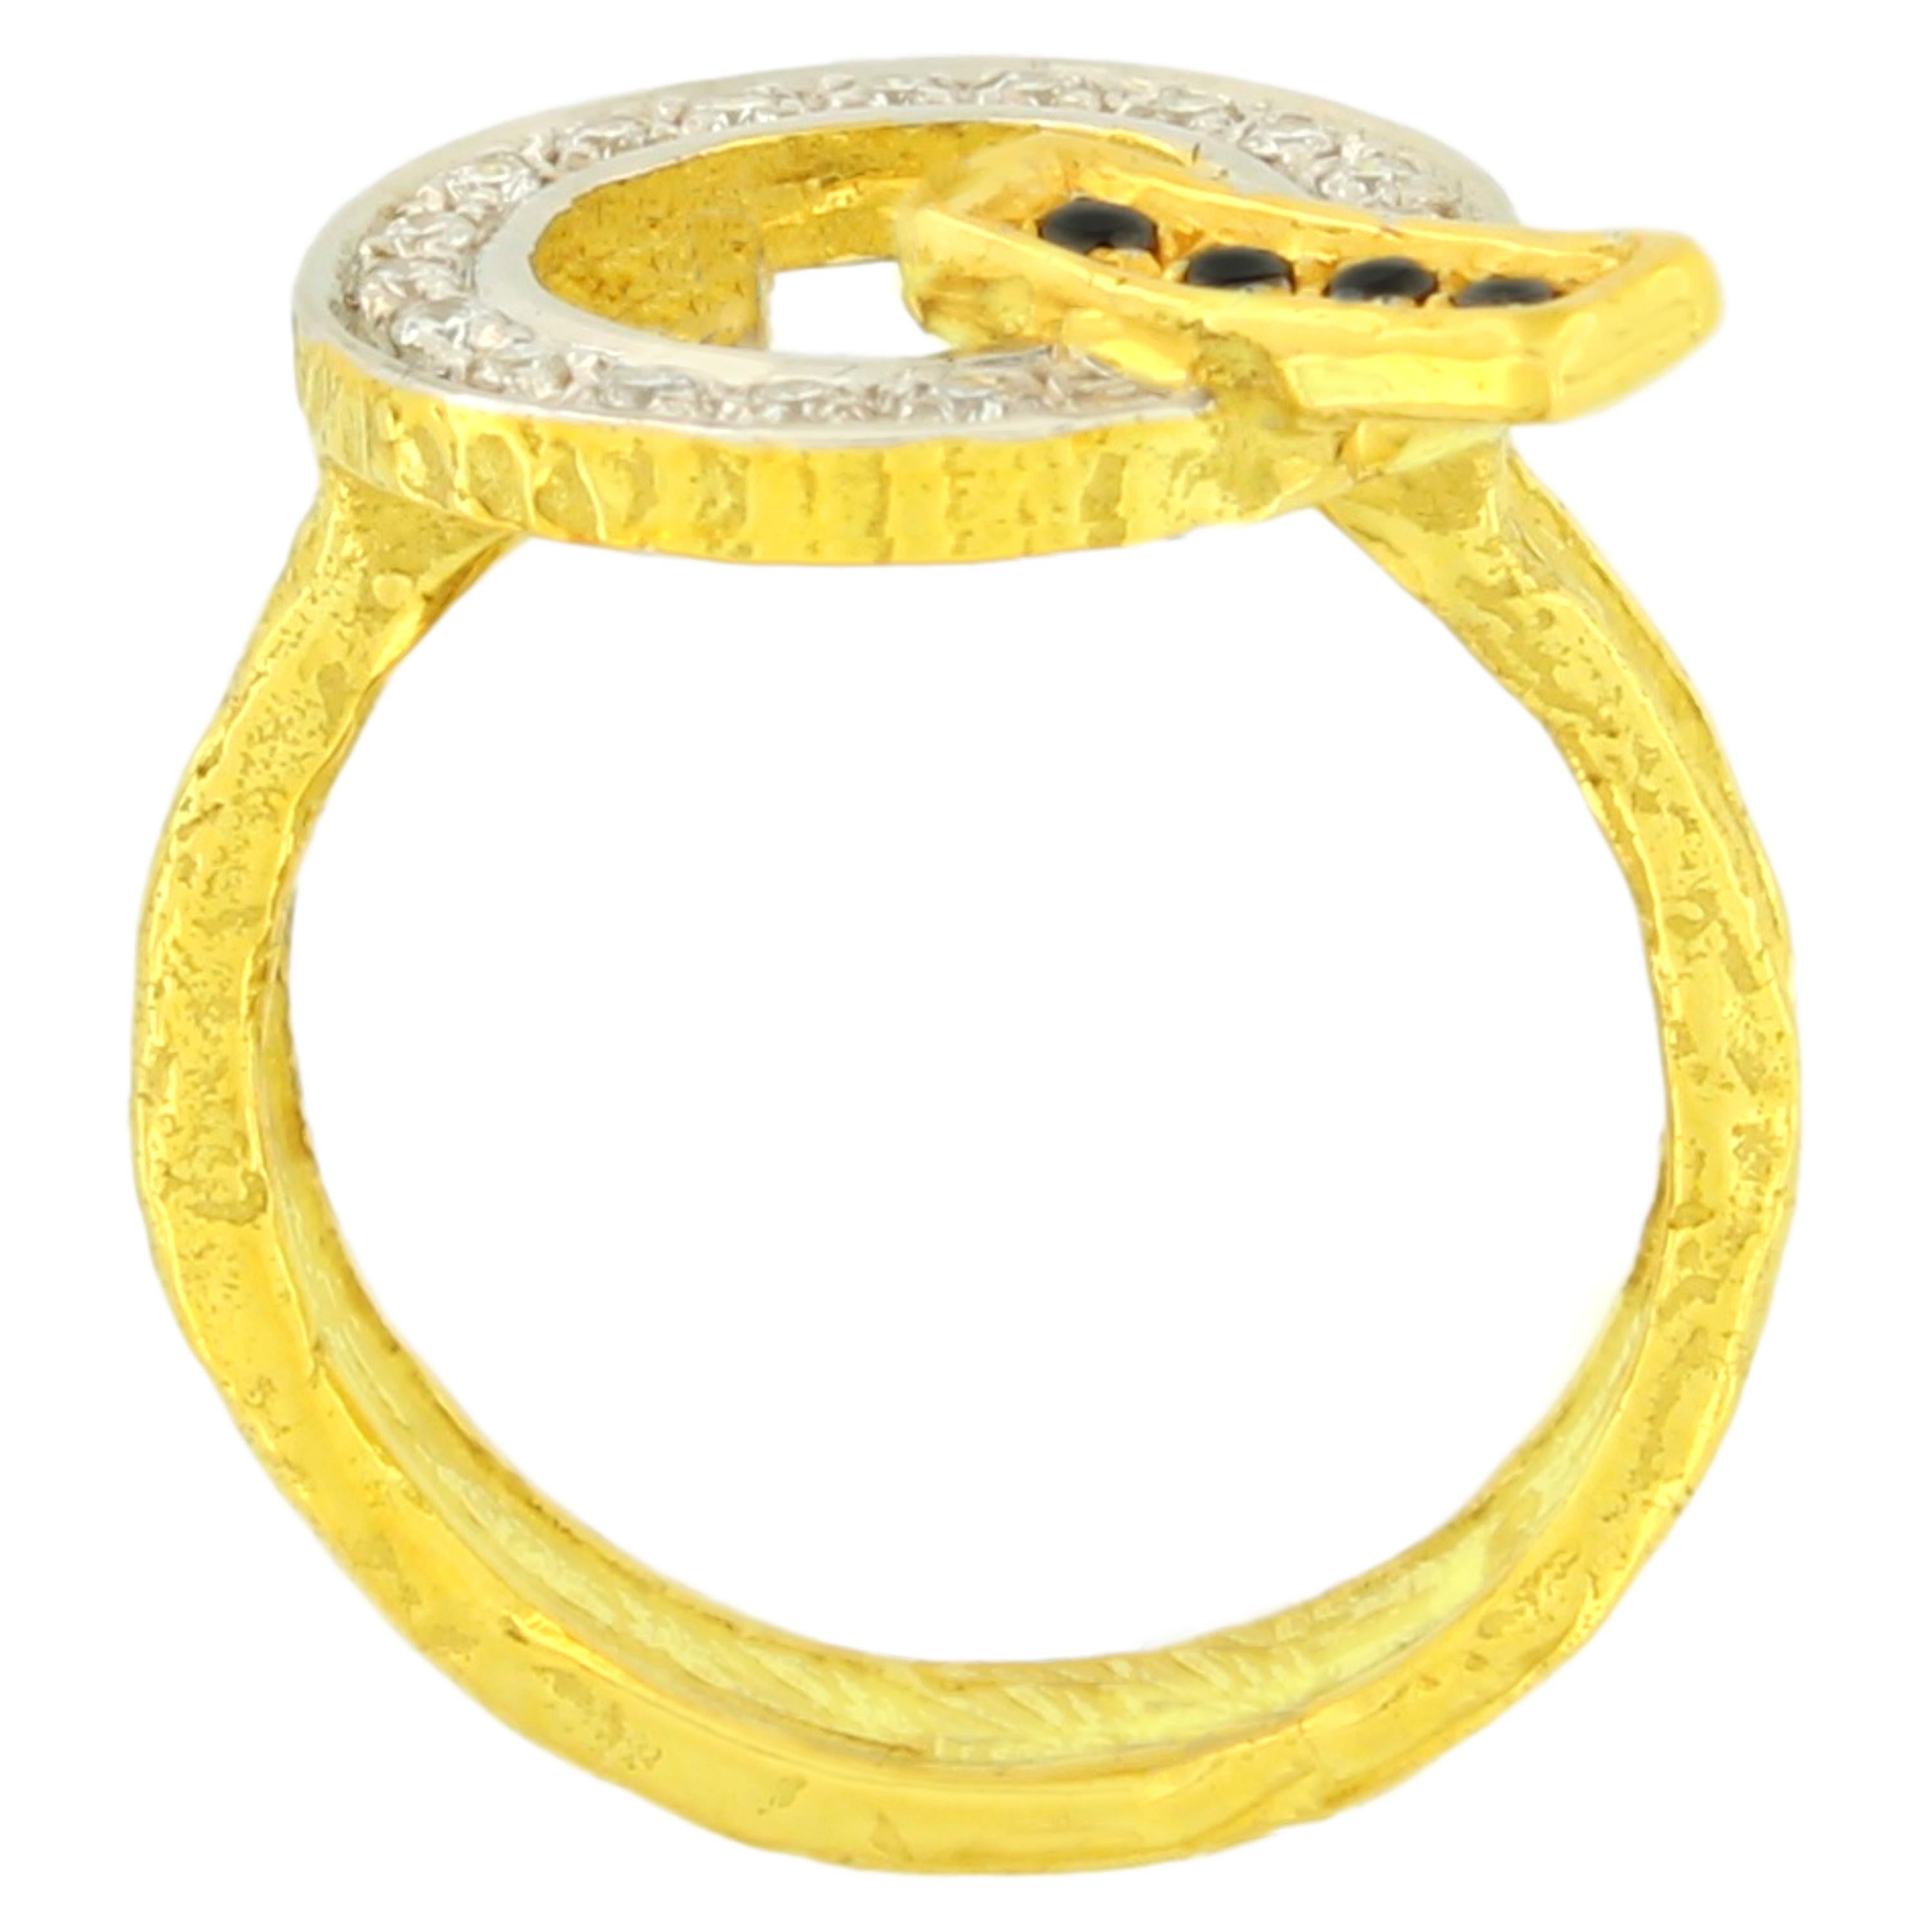 Contemporary Sacchi Black and White Diamonds Gemstones 18 Karat Yellow Gold Cocktail Ring For Sale